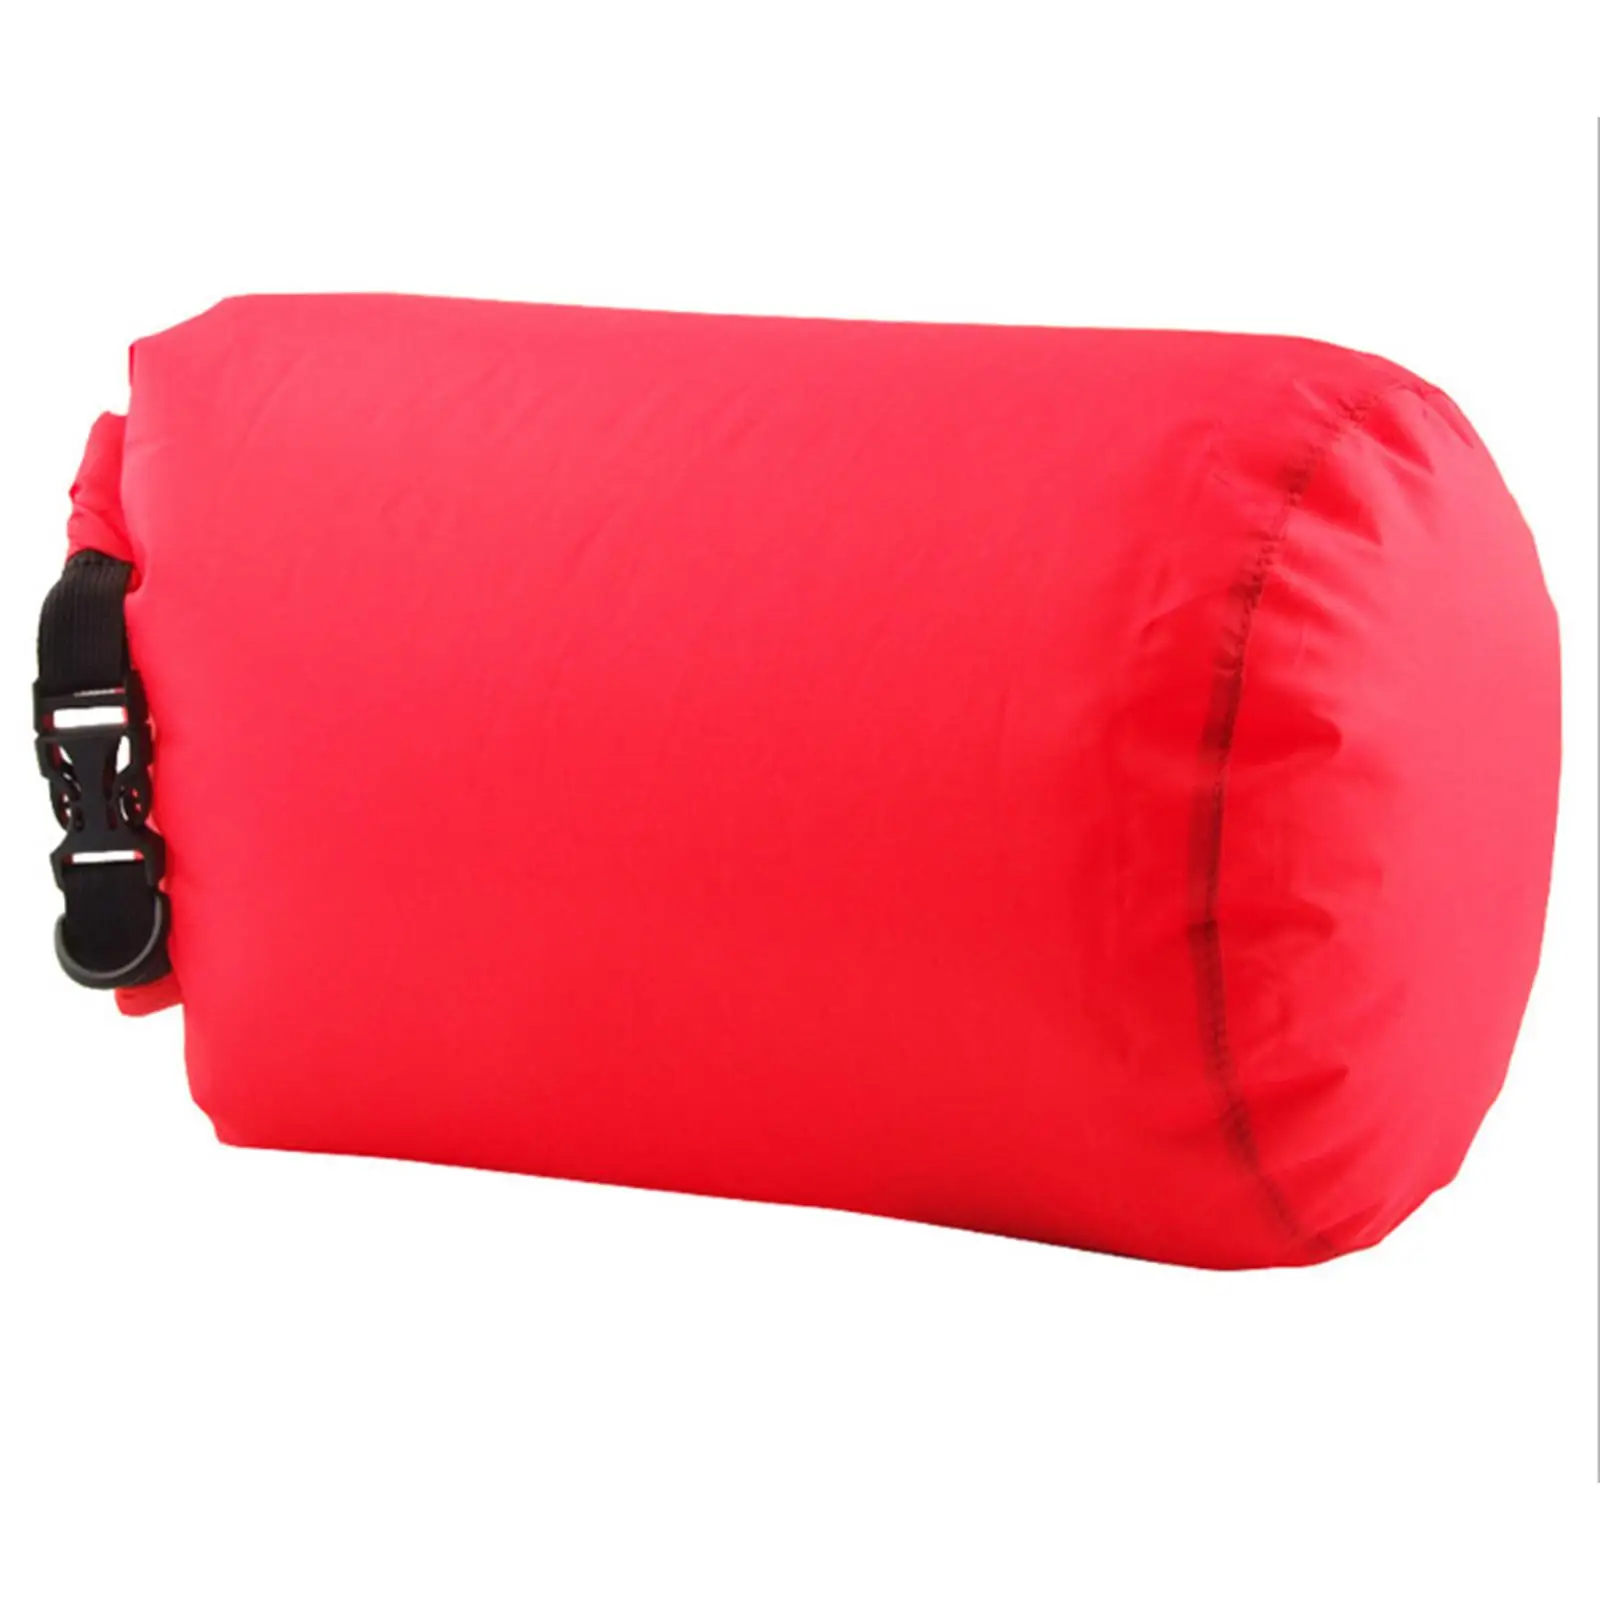 5Pcs Dry Bag Set Waterproof Drying Sack Pouch Outdoor Storage Bag 1.5L /2.5L /3.5L /4.5L /6L for Kayaking Rafting Boating